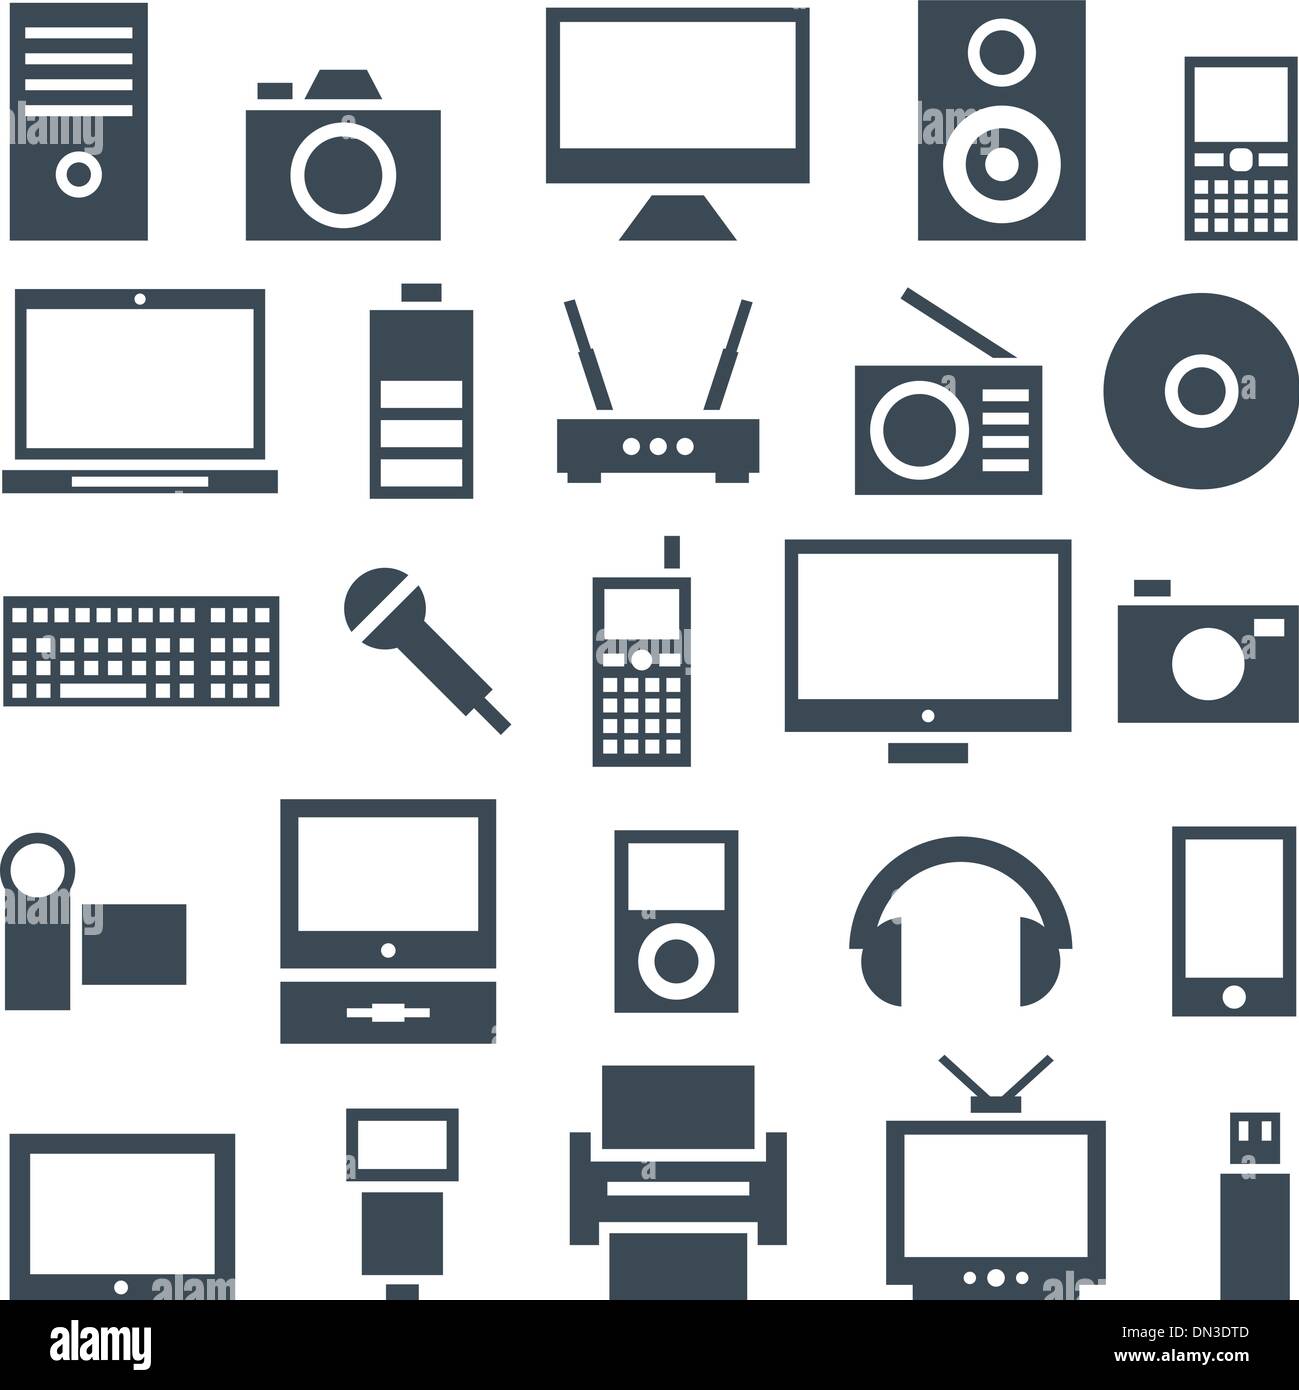 Icon set gadgets, computer equipment and electronics. Stock Vector